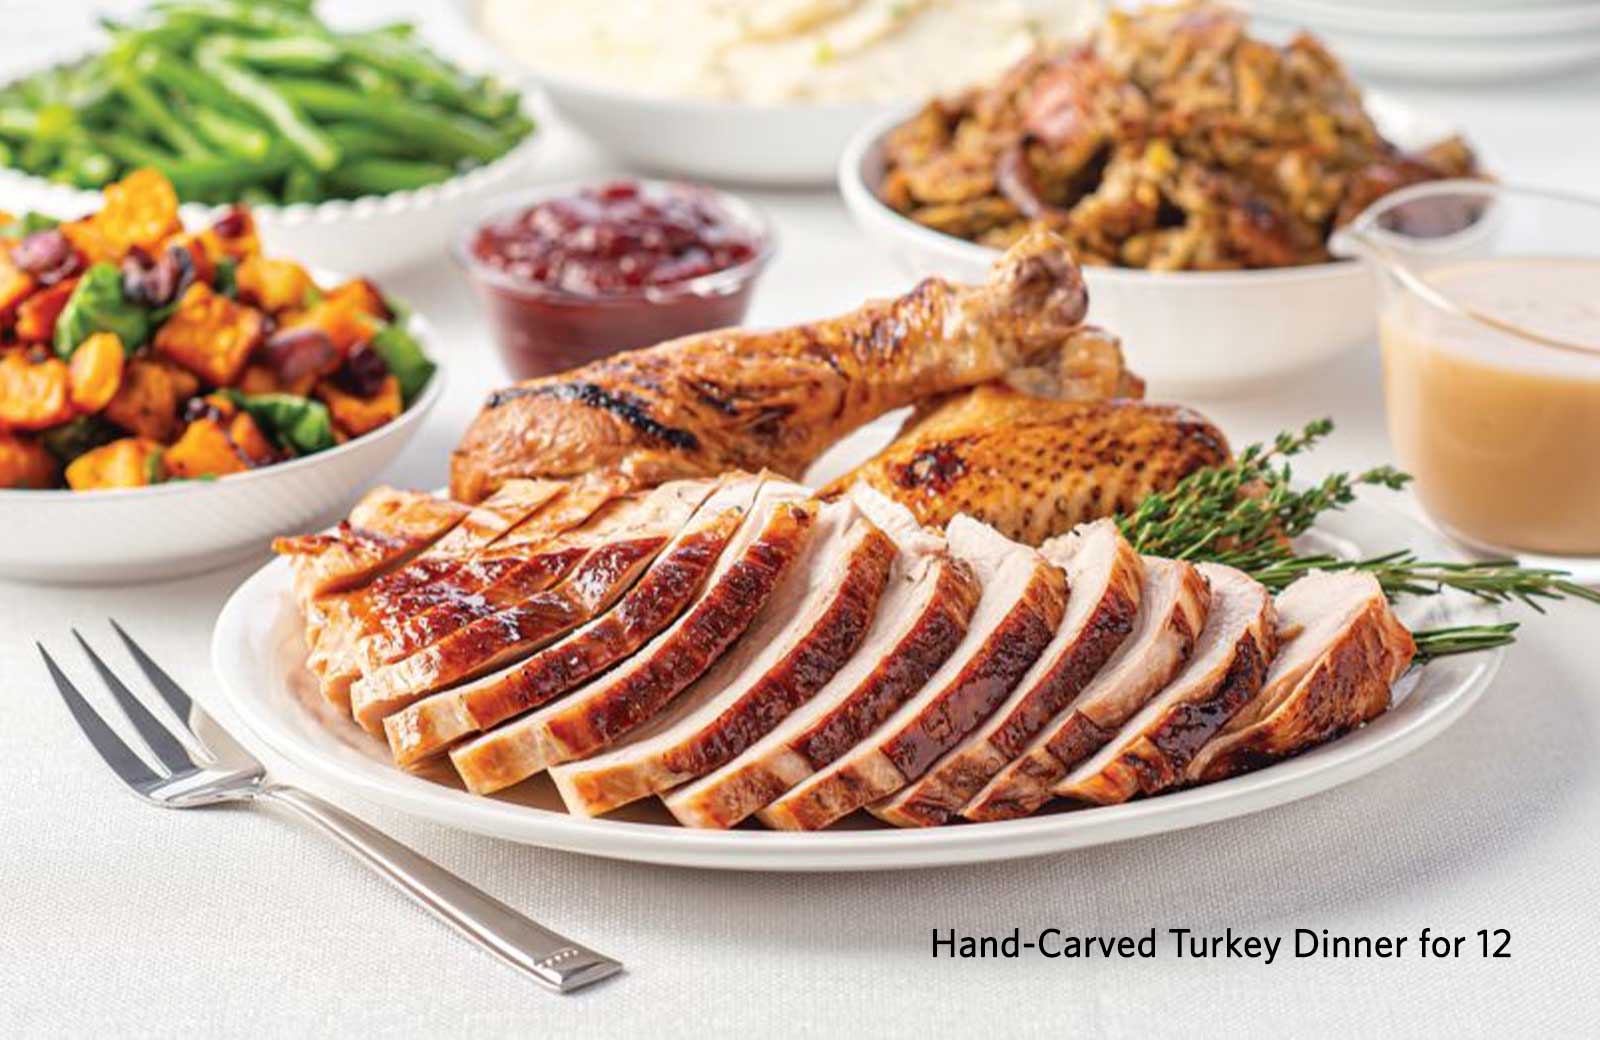 How the Turkey Is Carved